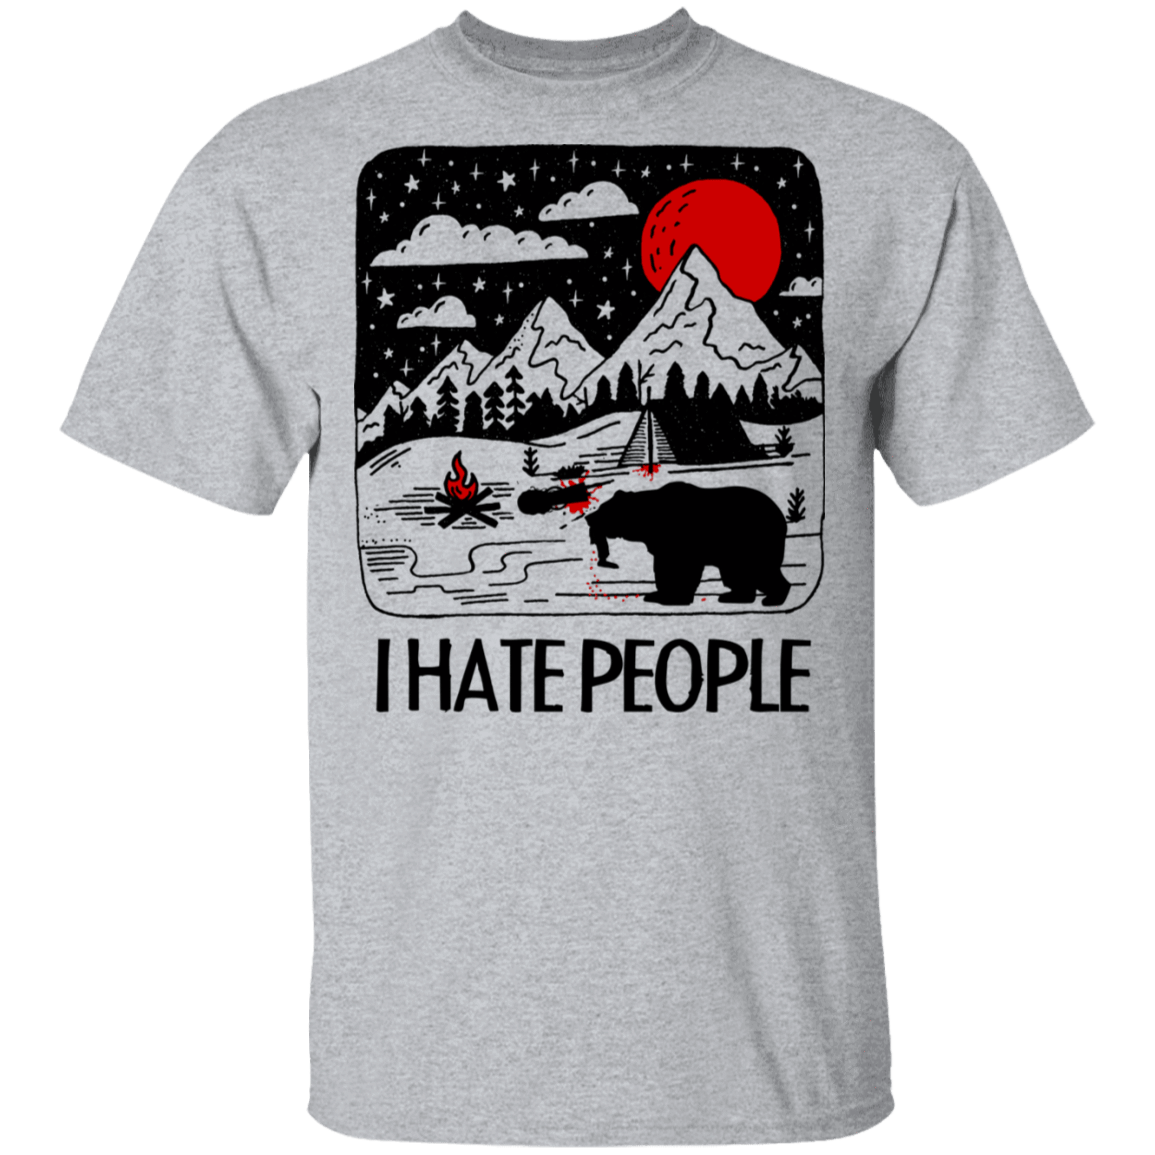 T-Shirts Sport Grey / S I Hate People T-Shirt